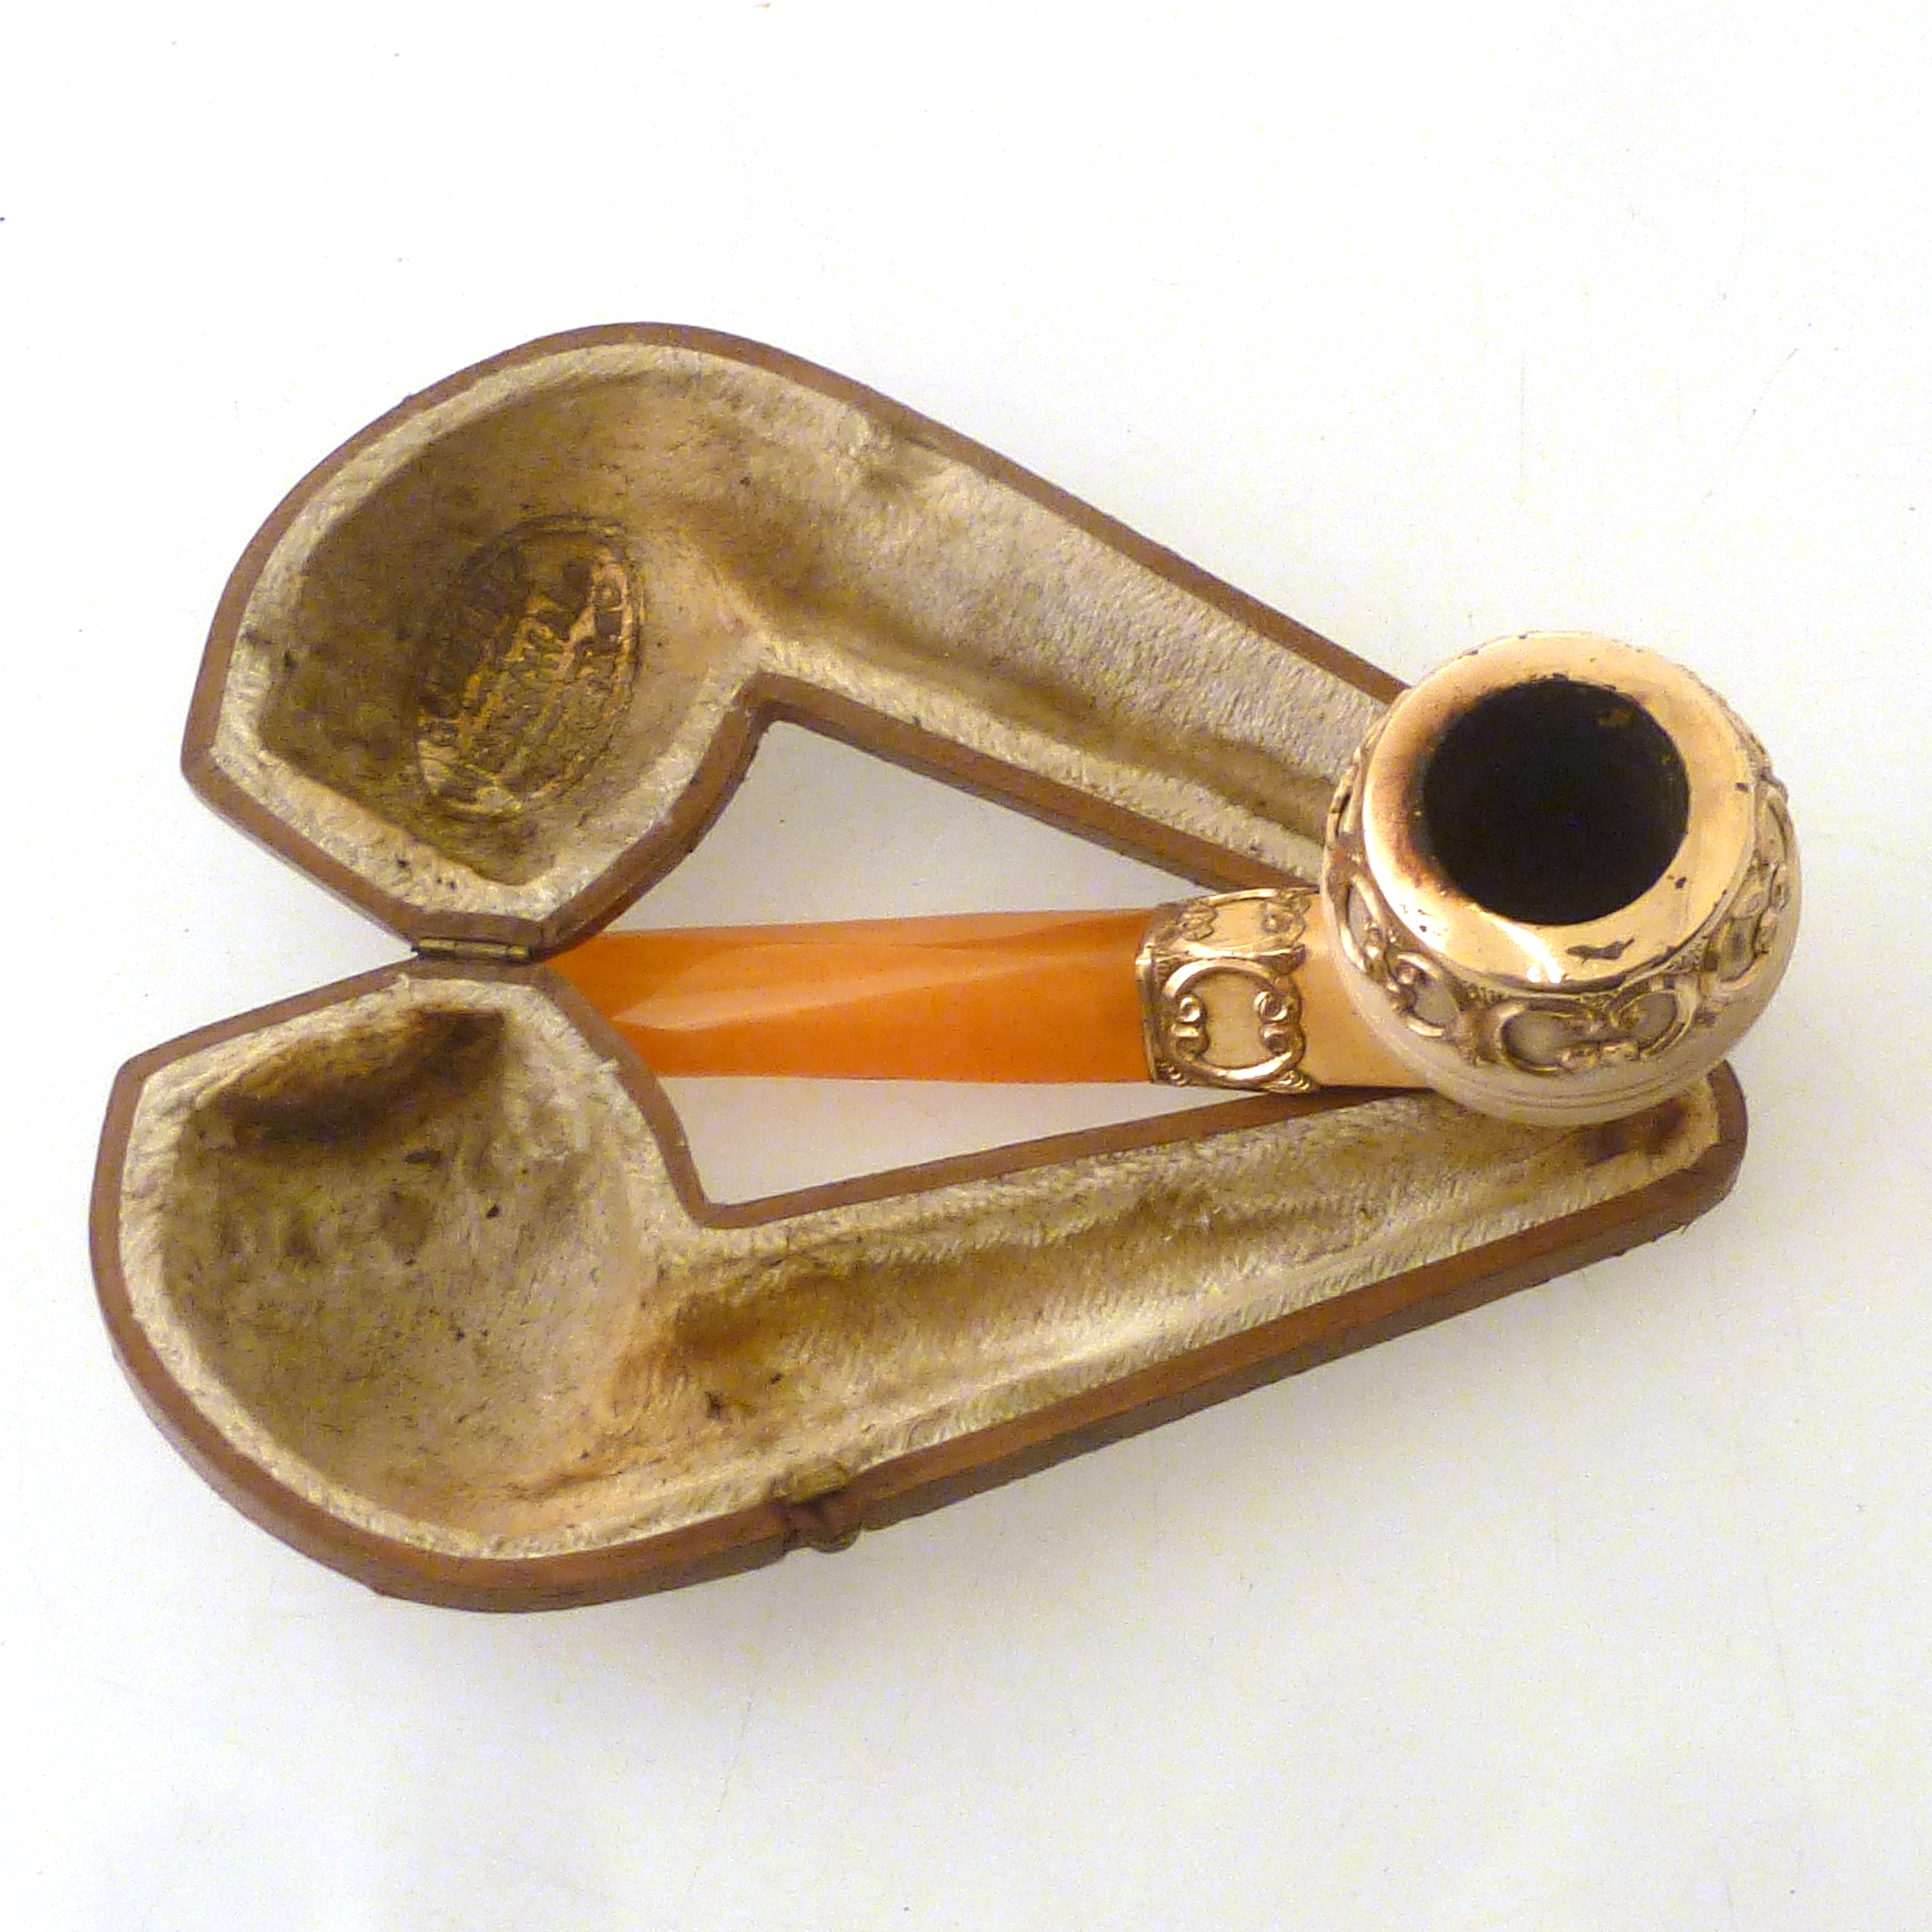 MEERSCHAUM PIPE IN CASE APPROX L: 5" - Image 3 of 3